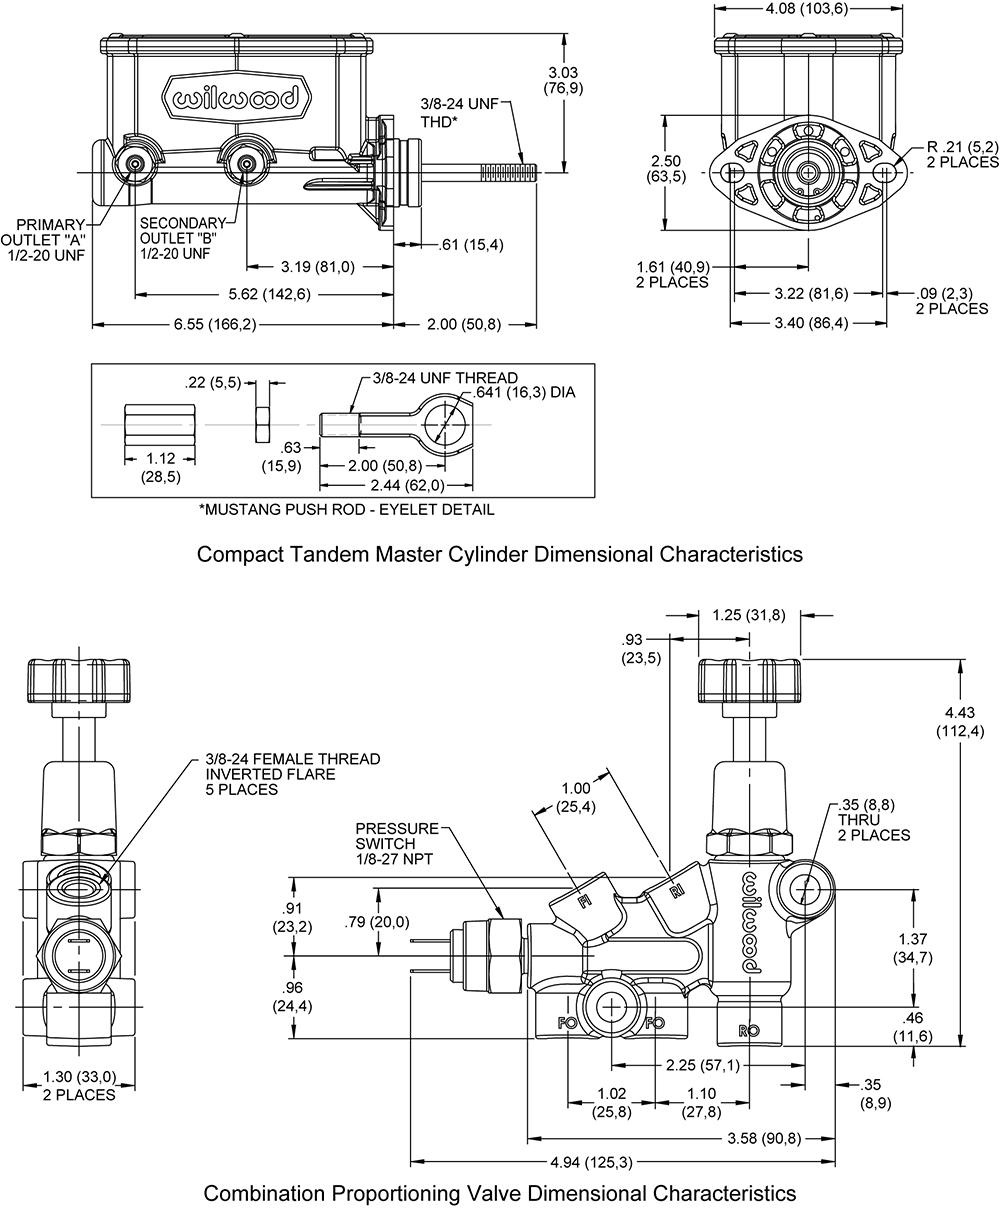 Wilwood Compact Tandem M/C w/Bracket and Valve (Mustang) Drawing